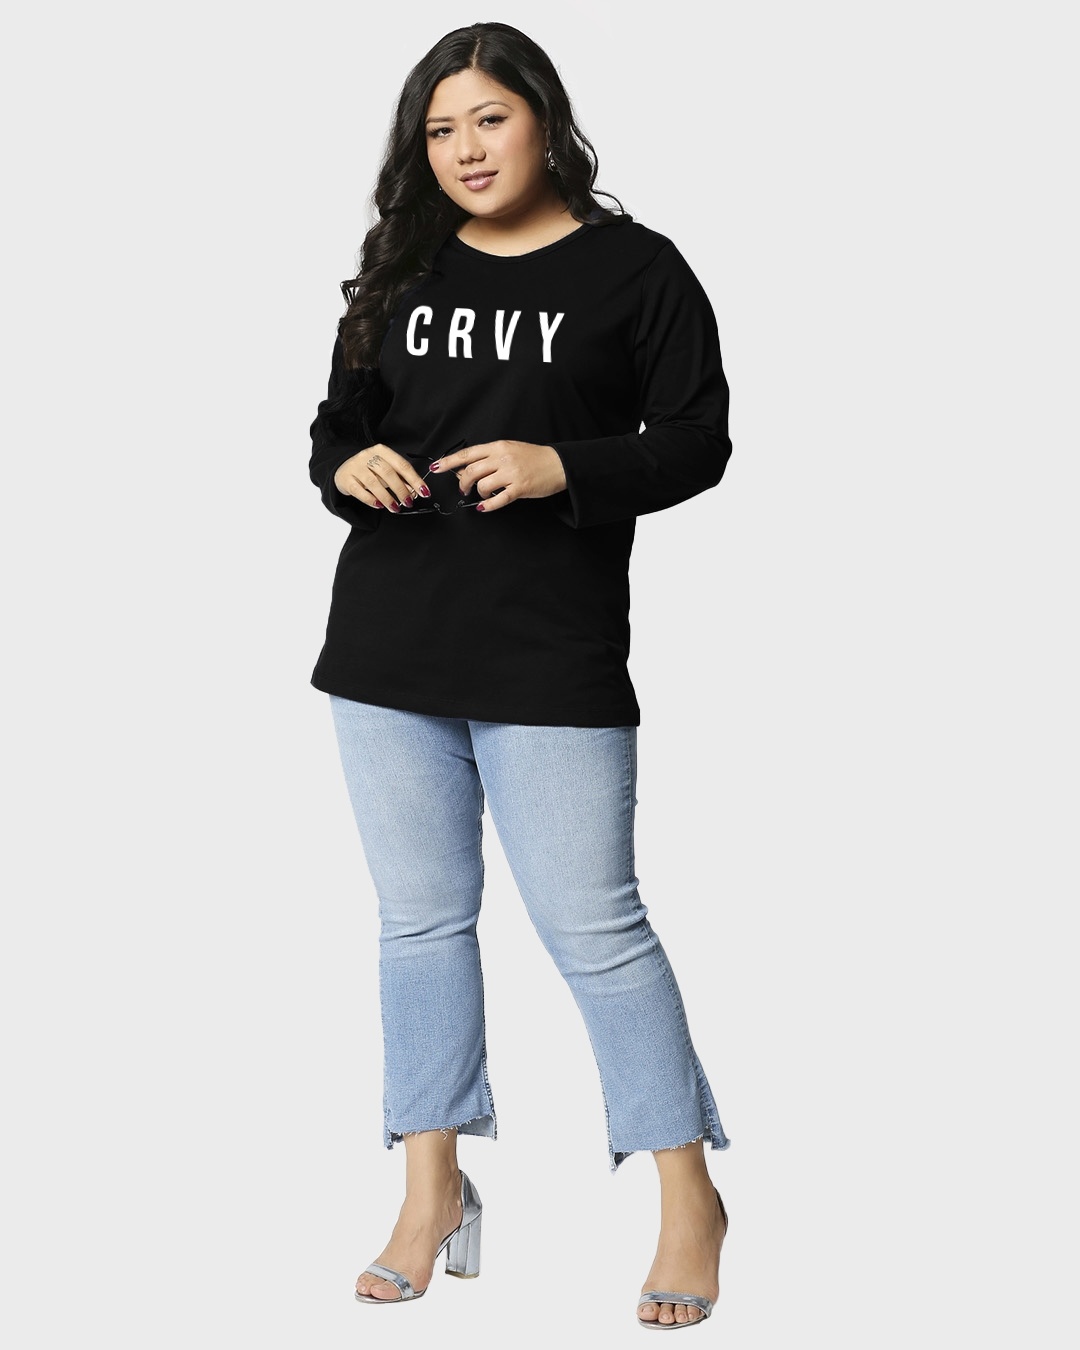 Shop Crvy Full Sleeves Printed T-Shirt Plus Size-Full